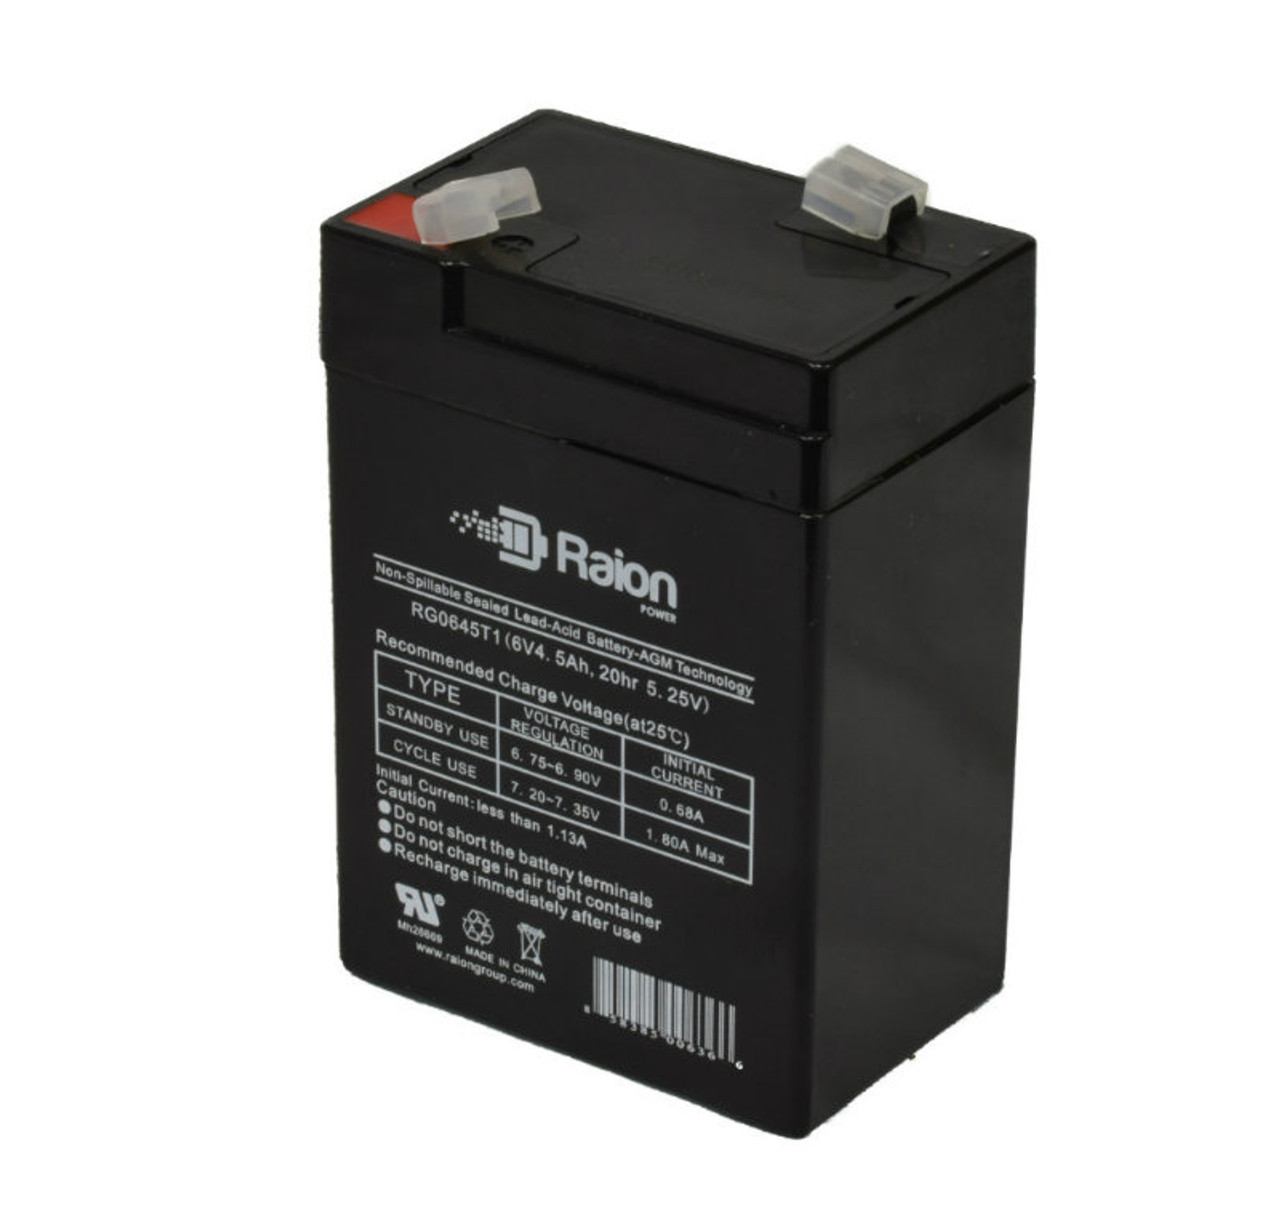 Raion Power RG0645T1 6V 4.5Ah Replacement Battery Cartridge for Excel XL640